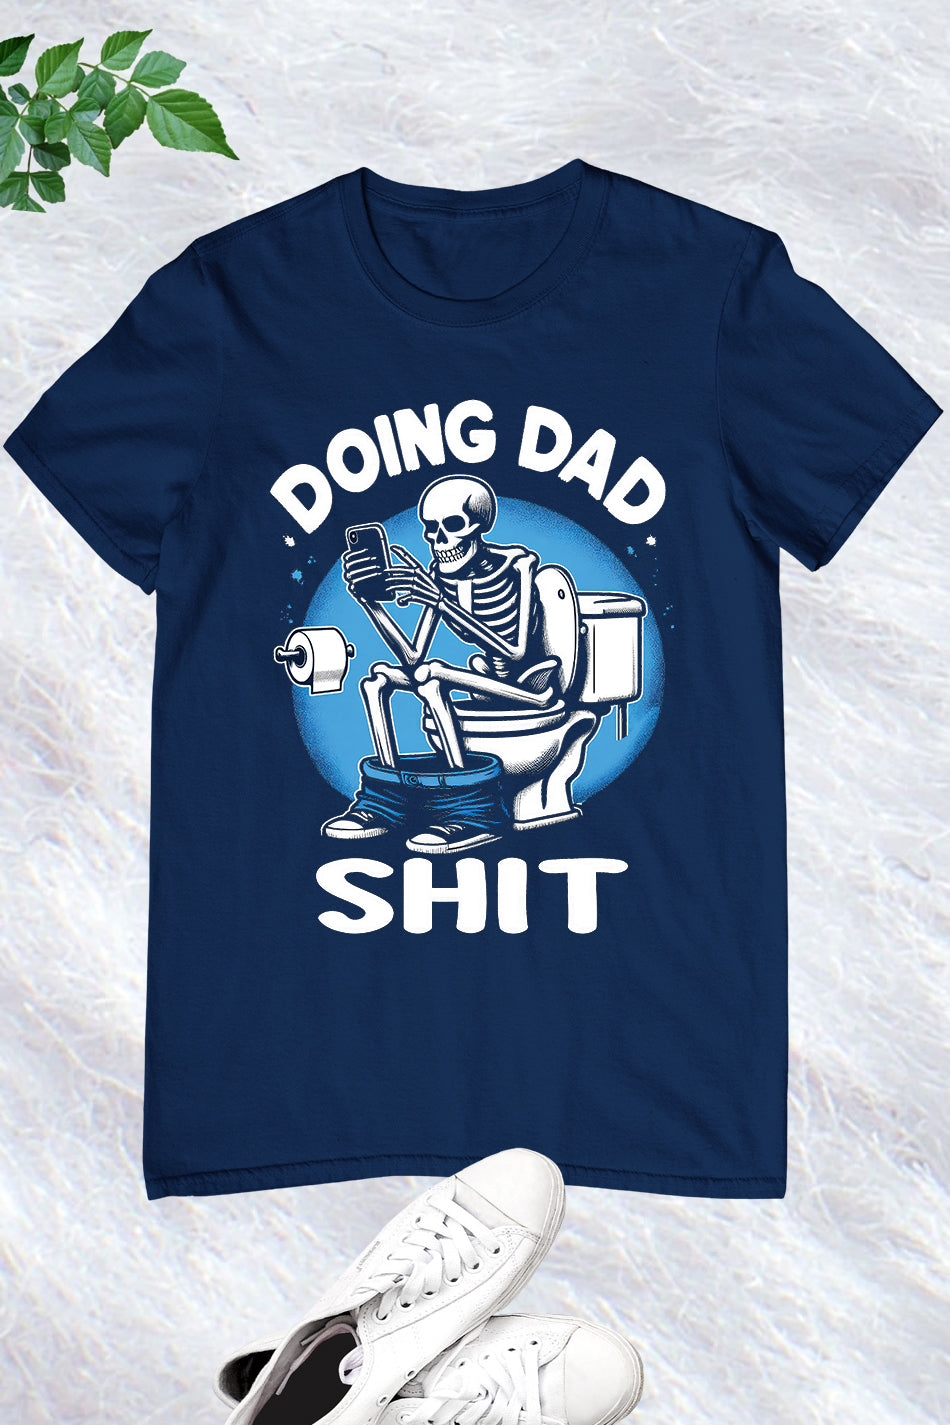 Doing Dad Shit Funny Tees